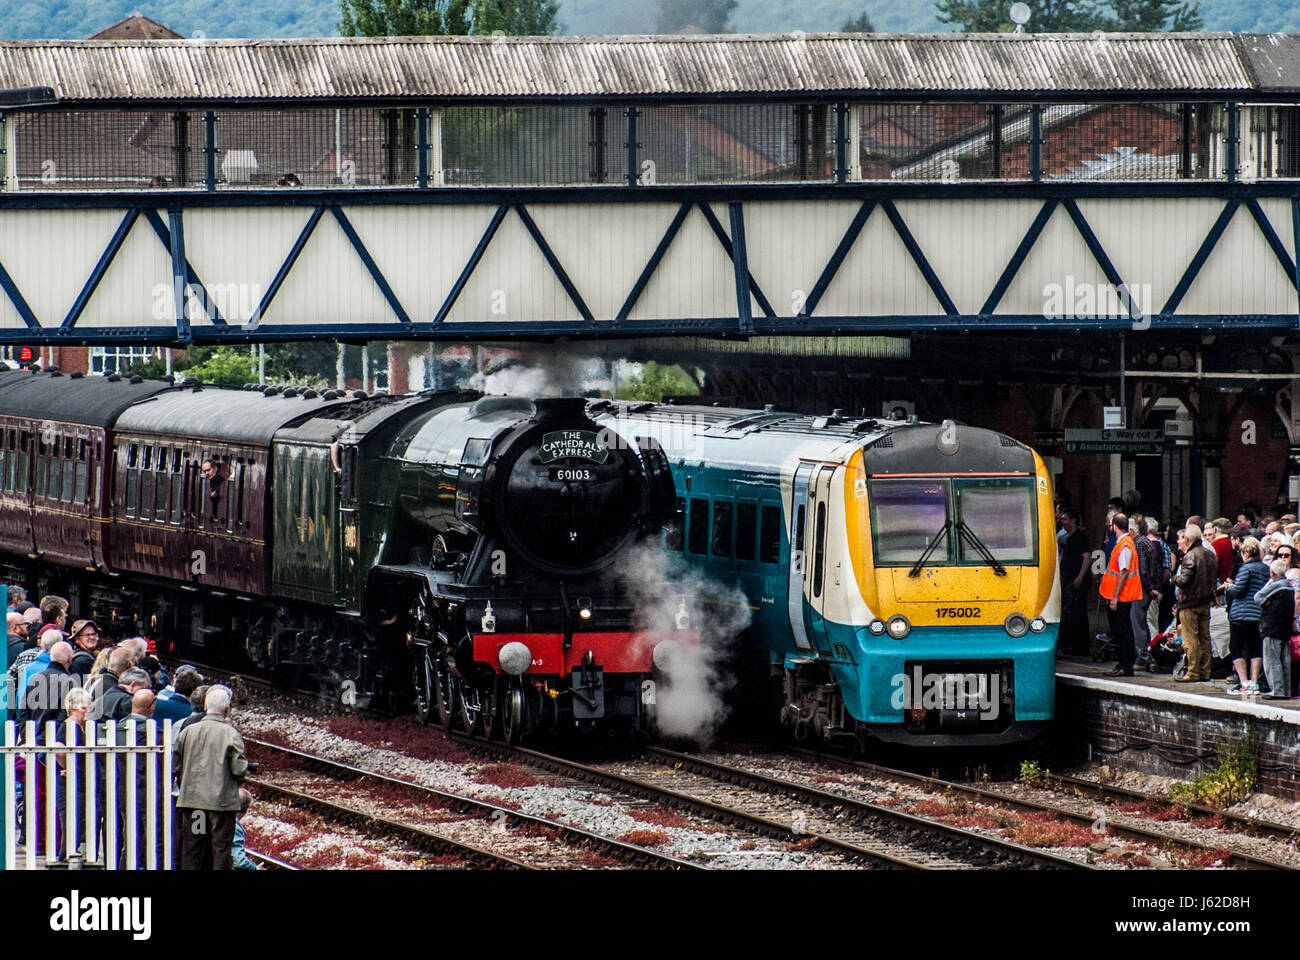 Hereford, Herefordshire. 19th May 2017. The Flying Scotsman is seen next to a modern diesel locamotive as crowds gather to see Pacific steam locomotive LNER Class A3 4472 commonly known as the Flying Scotsman at Hereford railway station as it travels from Shrewsbury to Cardiff and then Newport to Bristol Parkway via Gloucester. The 94 year old Flying Scotsman was originally built in Doncaster for the London and North Eastern Railway (LNER), emerging from the works on 24 February 1923. Credit: Jim Wood/Alamy Live News Stock Photo